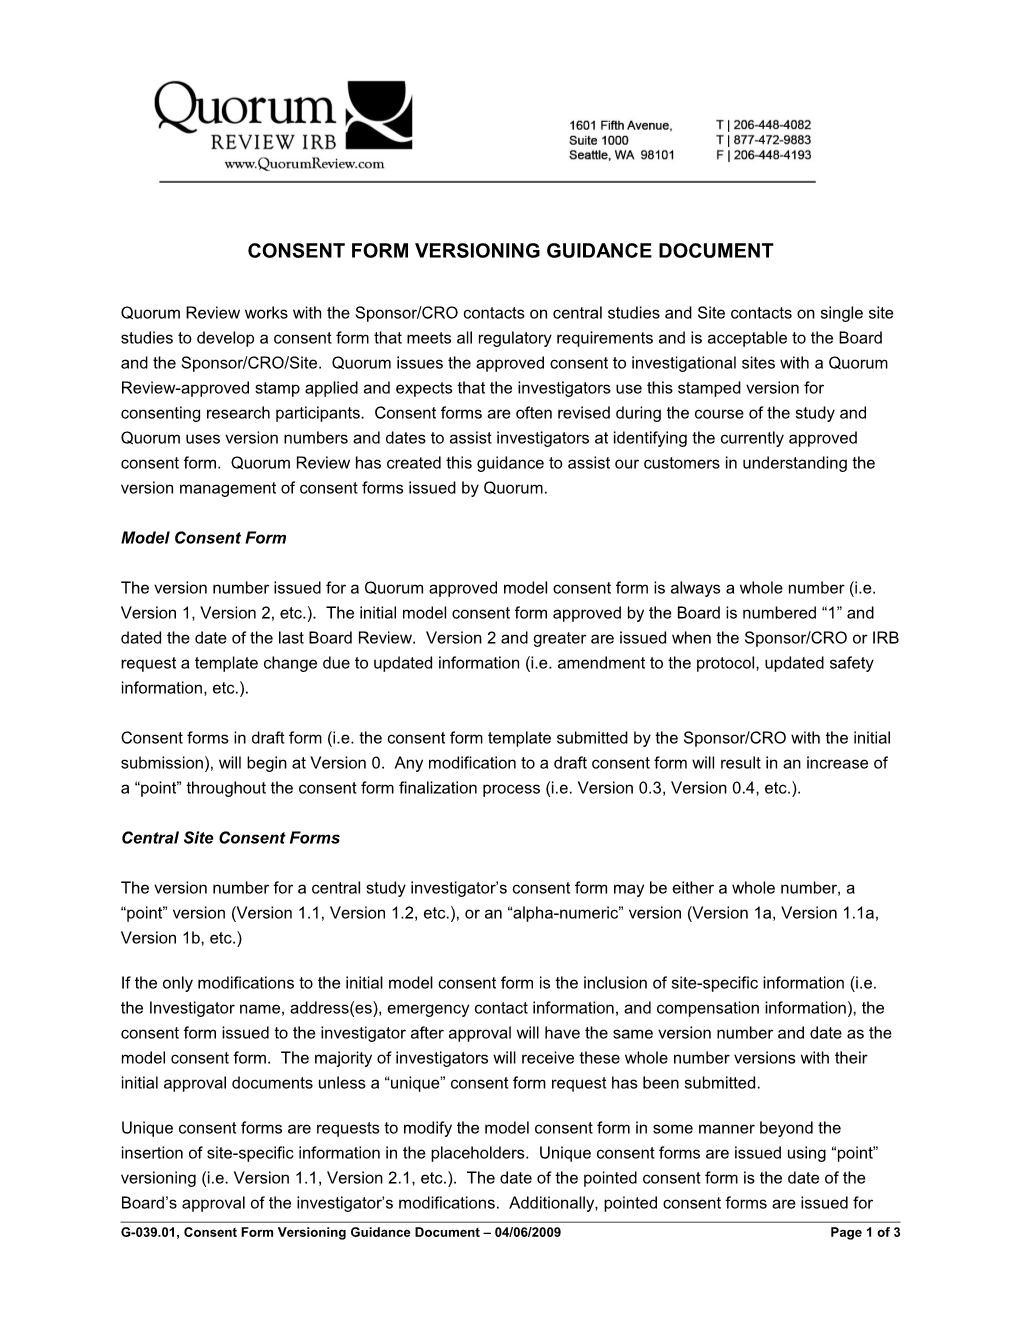 Consent Form Versioning Guidance Document